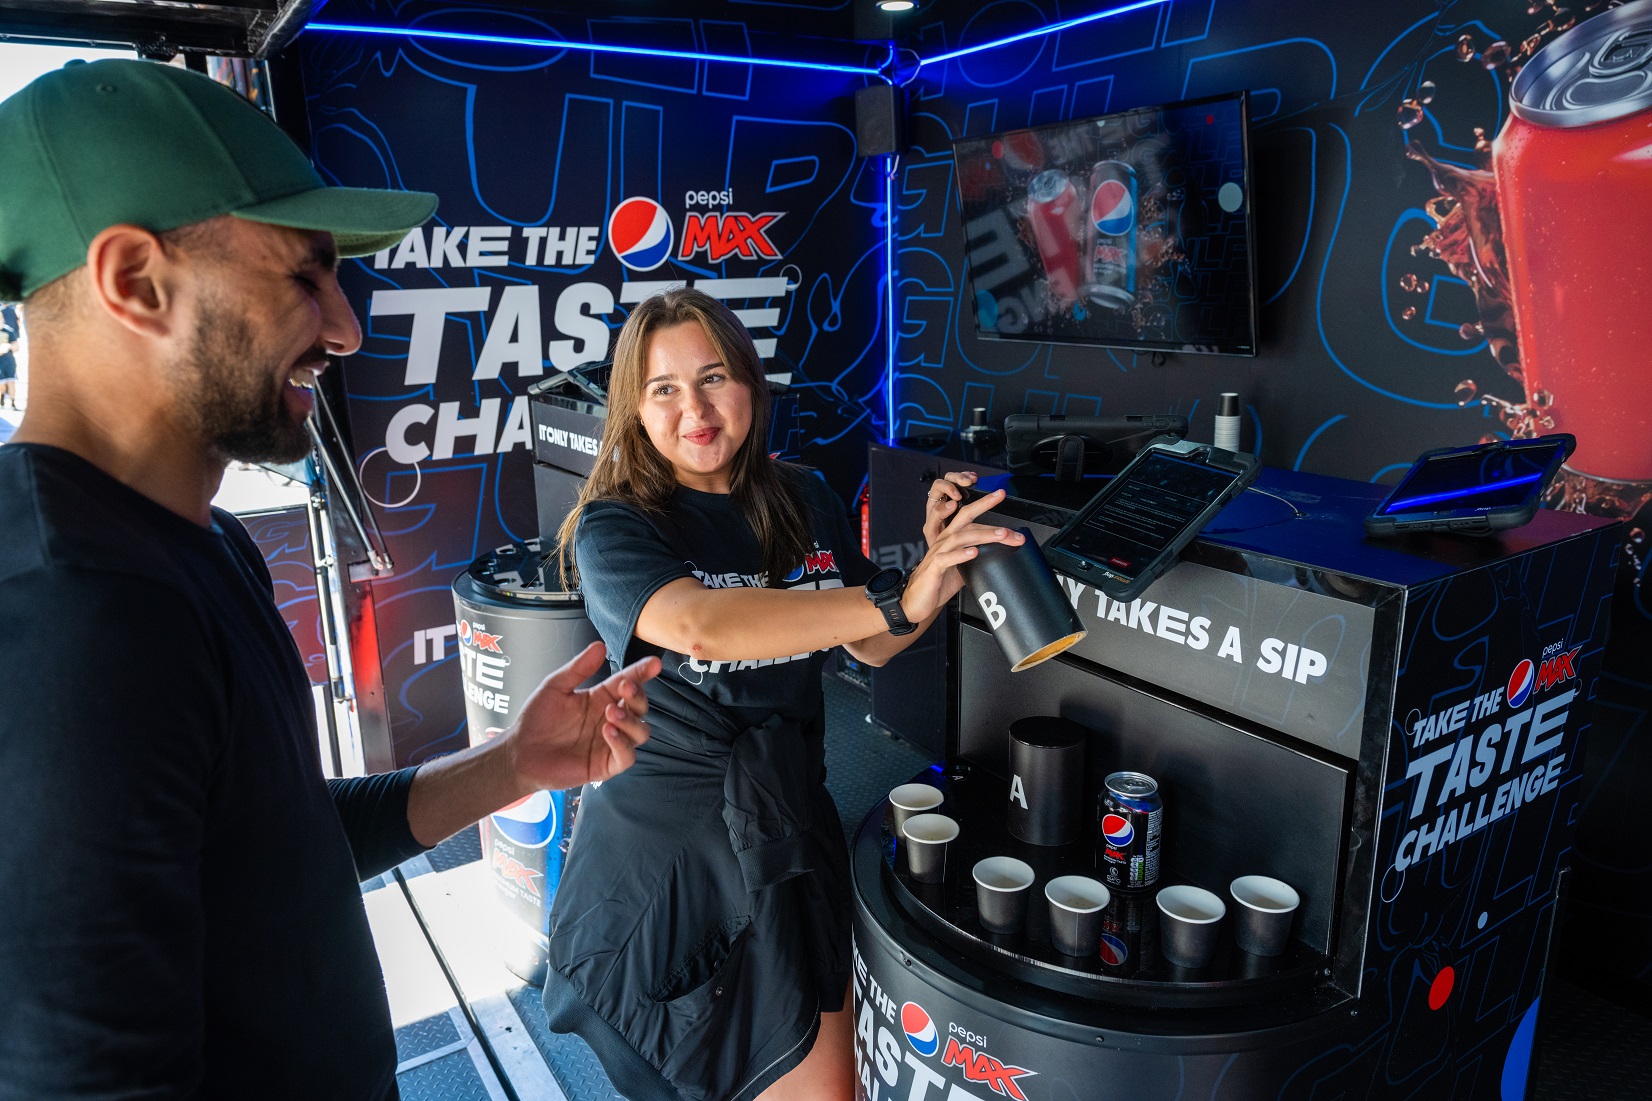 Pepsi MAX crowned as the nation's favourite cola in the Taste Challenge